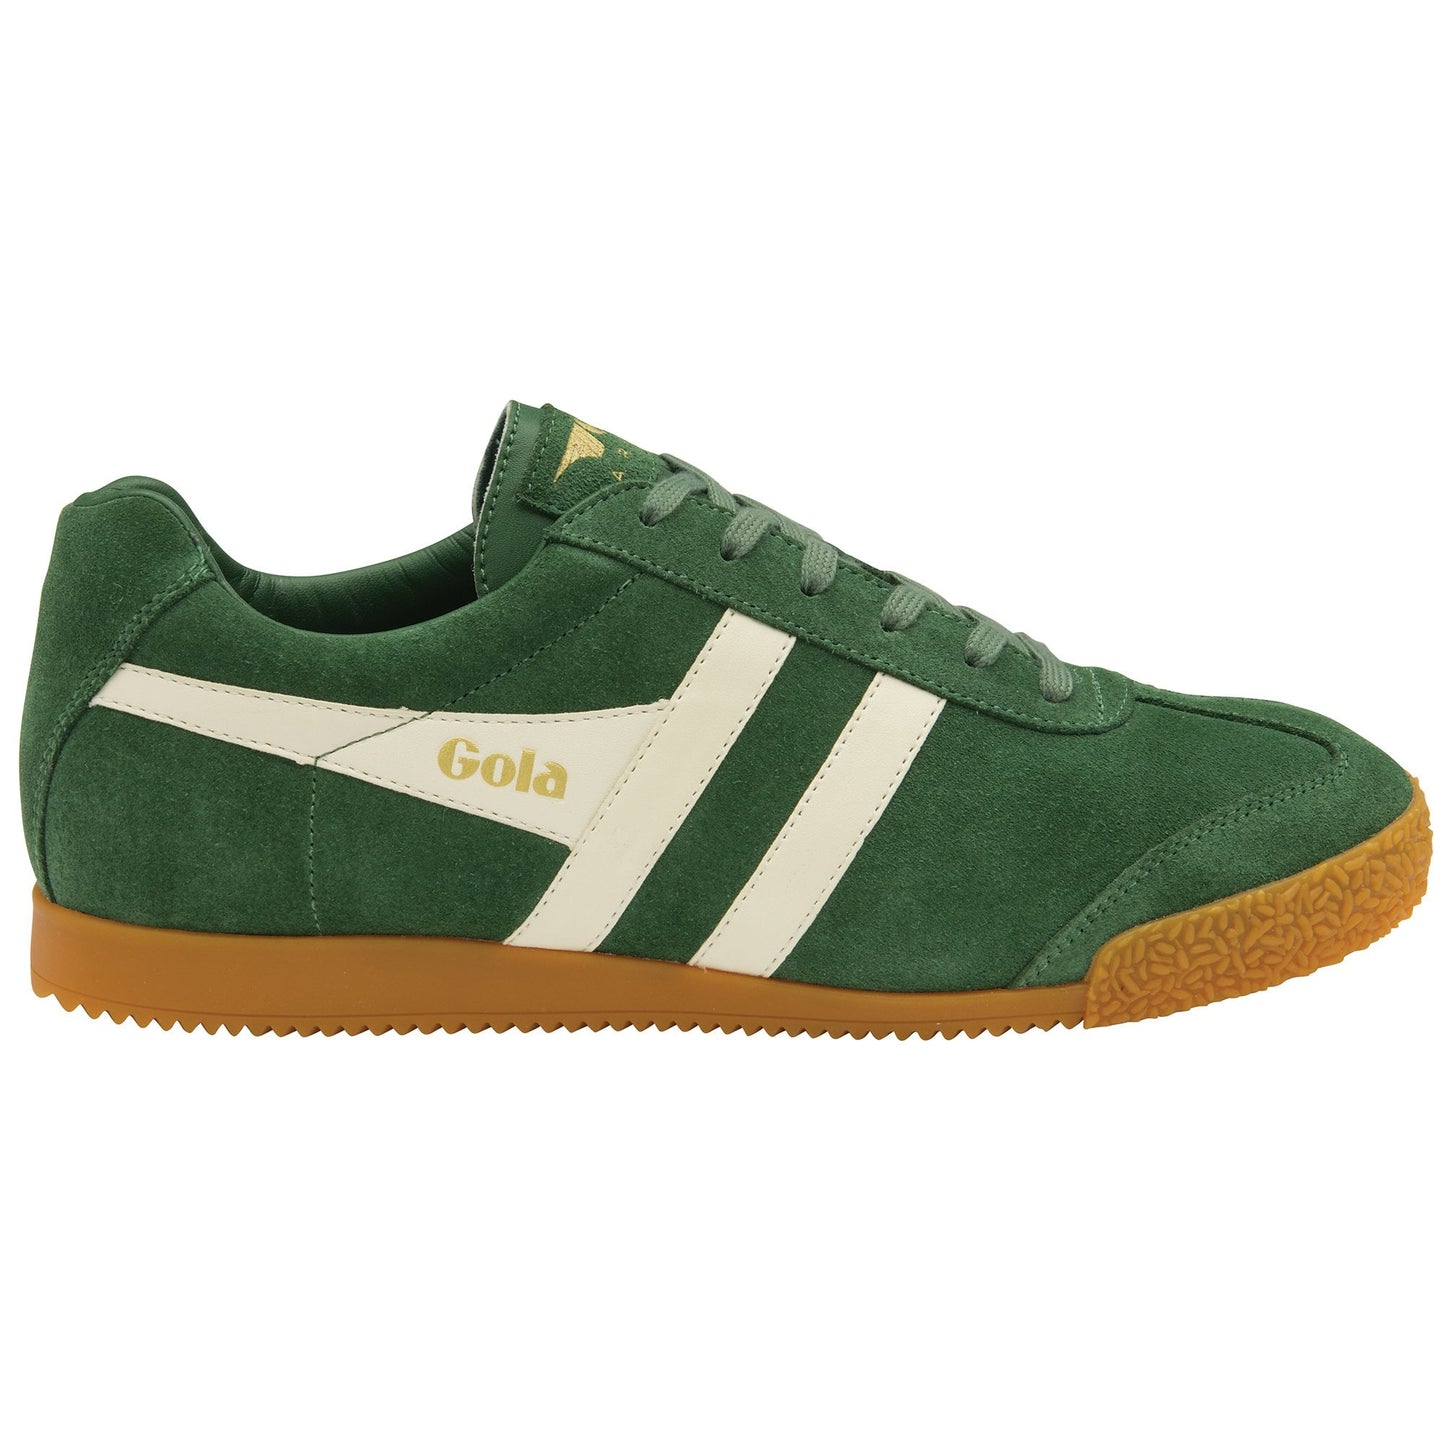 Gola Harrier Suede Mens Evergreen/Off White